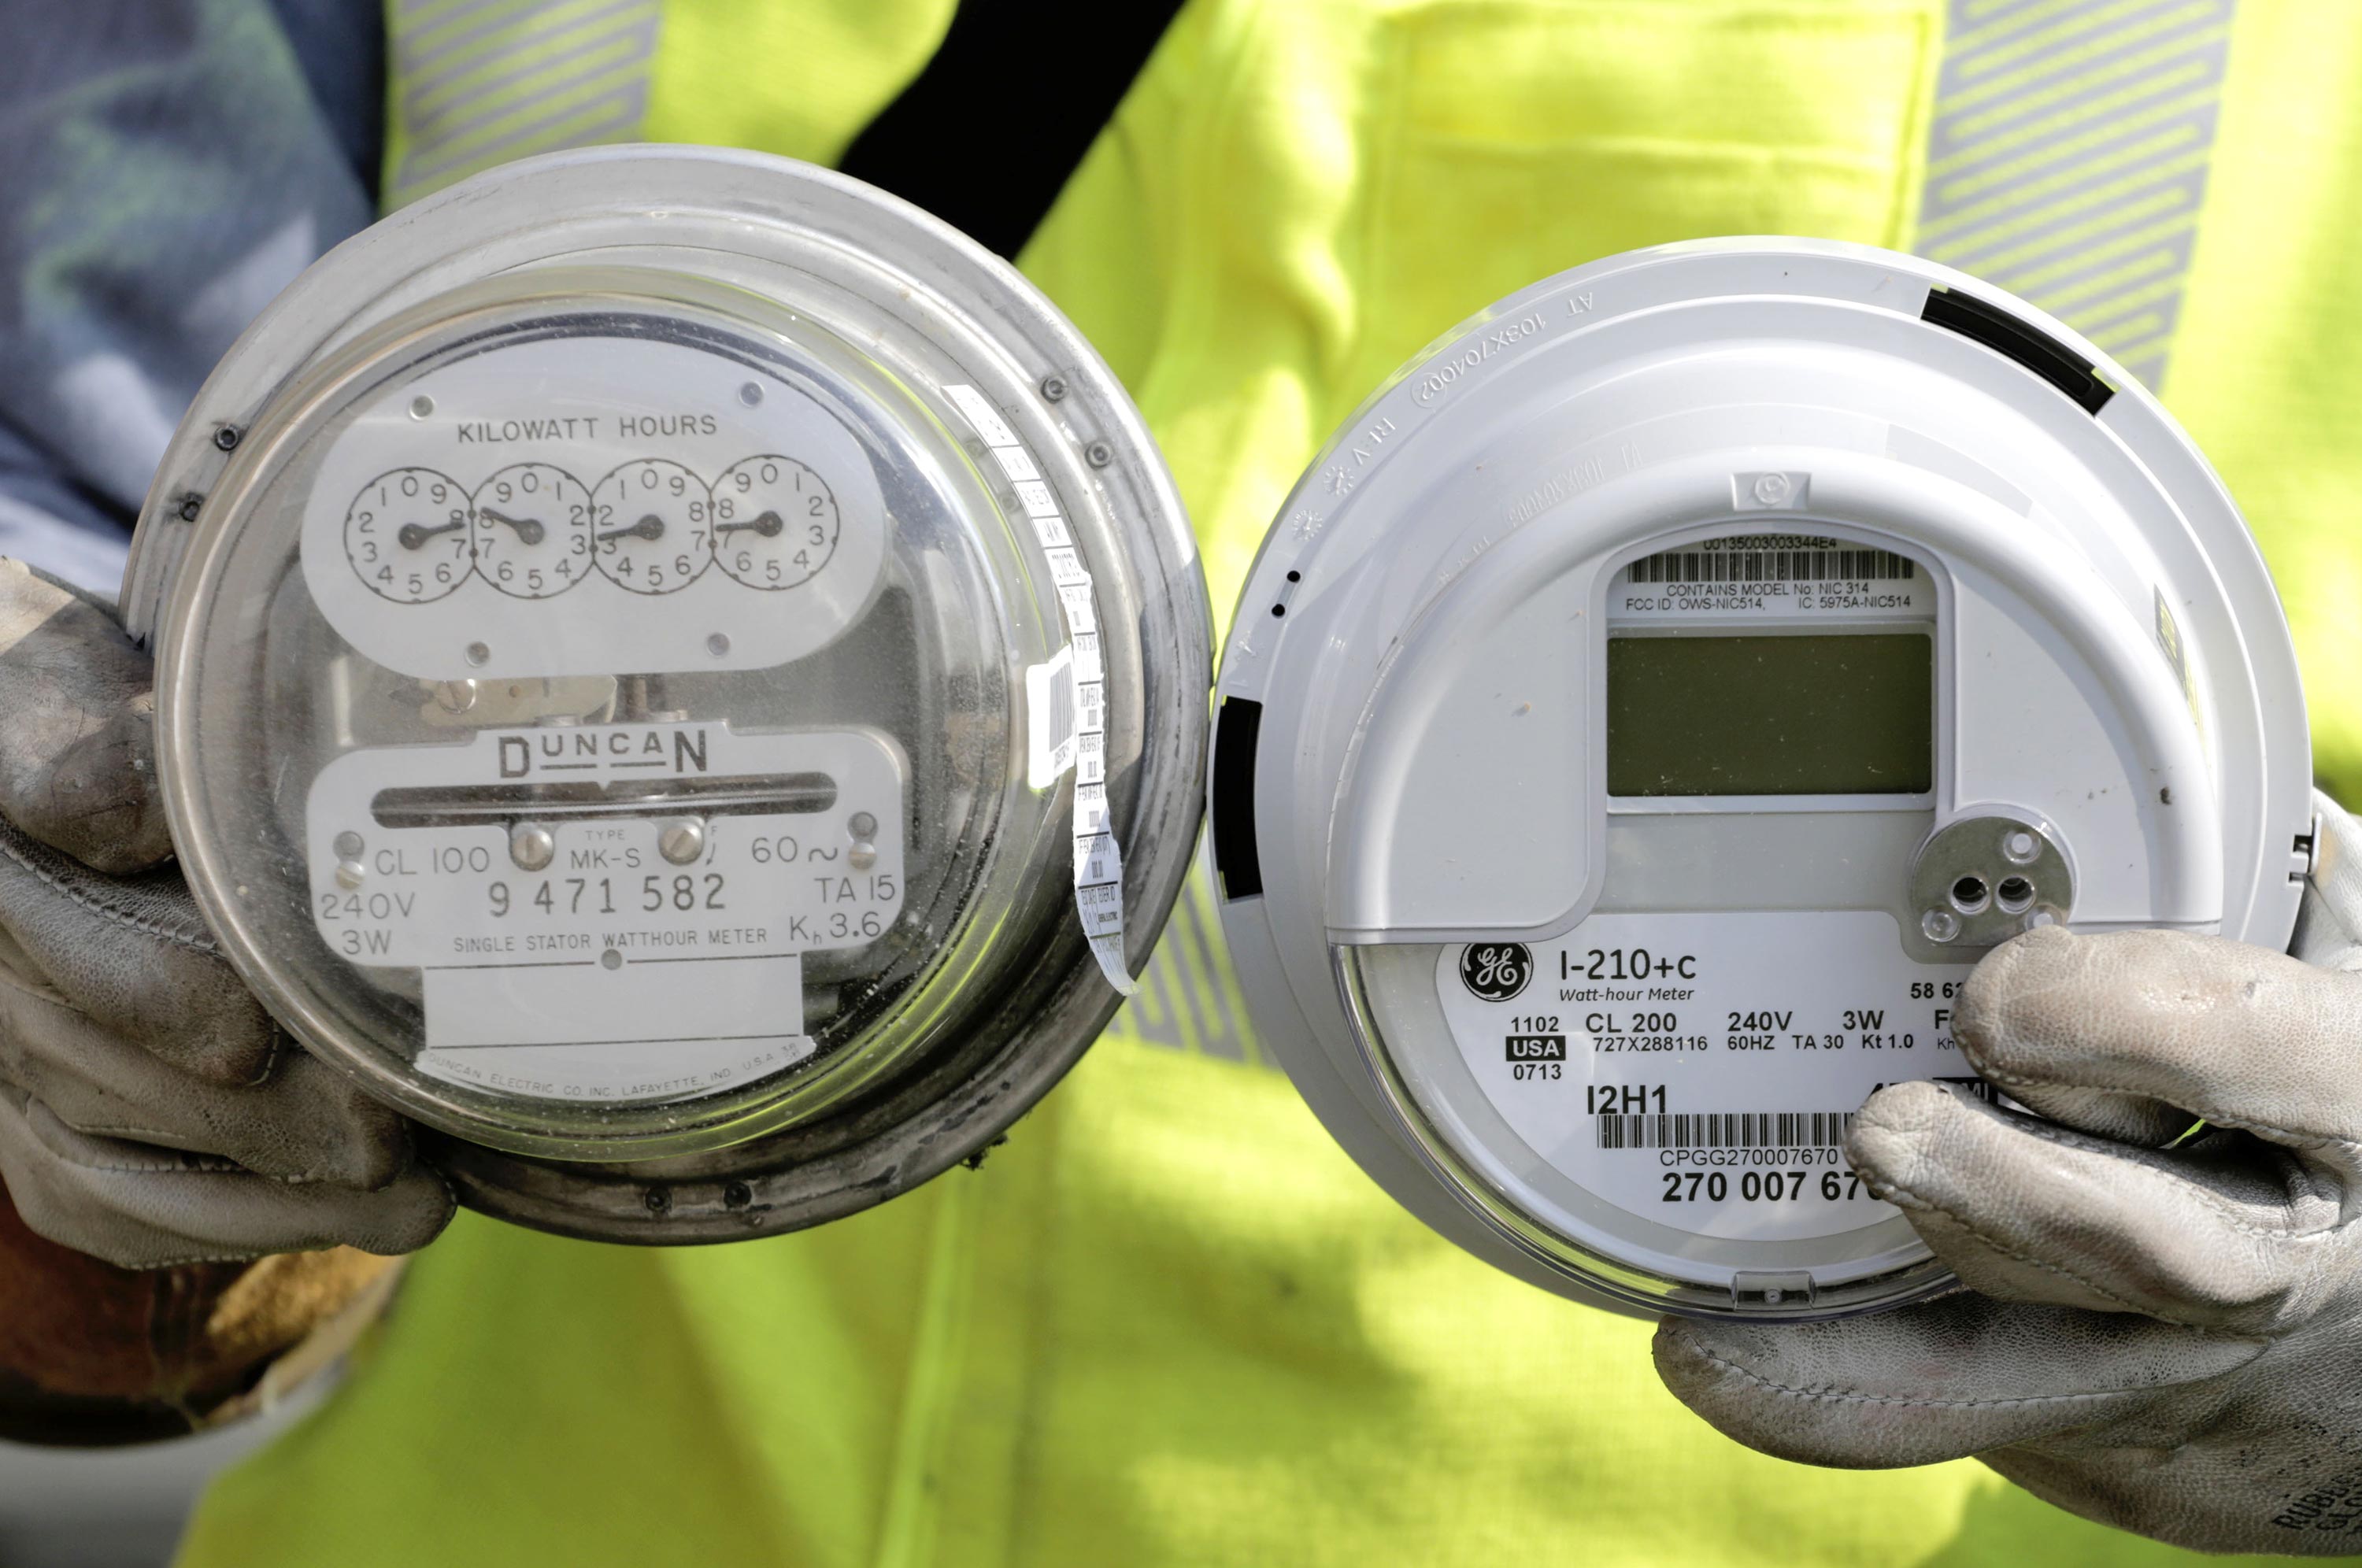 A senior energy technician for Commonwealth Edison holds a standard electricity meter, left, and a new &quot;smart&quot; meter in North Riverside, Ill. on Sept. 6, 2013. Photographer: M. Spencer Green/AP Photo